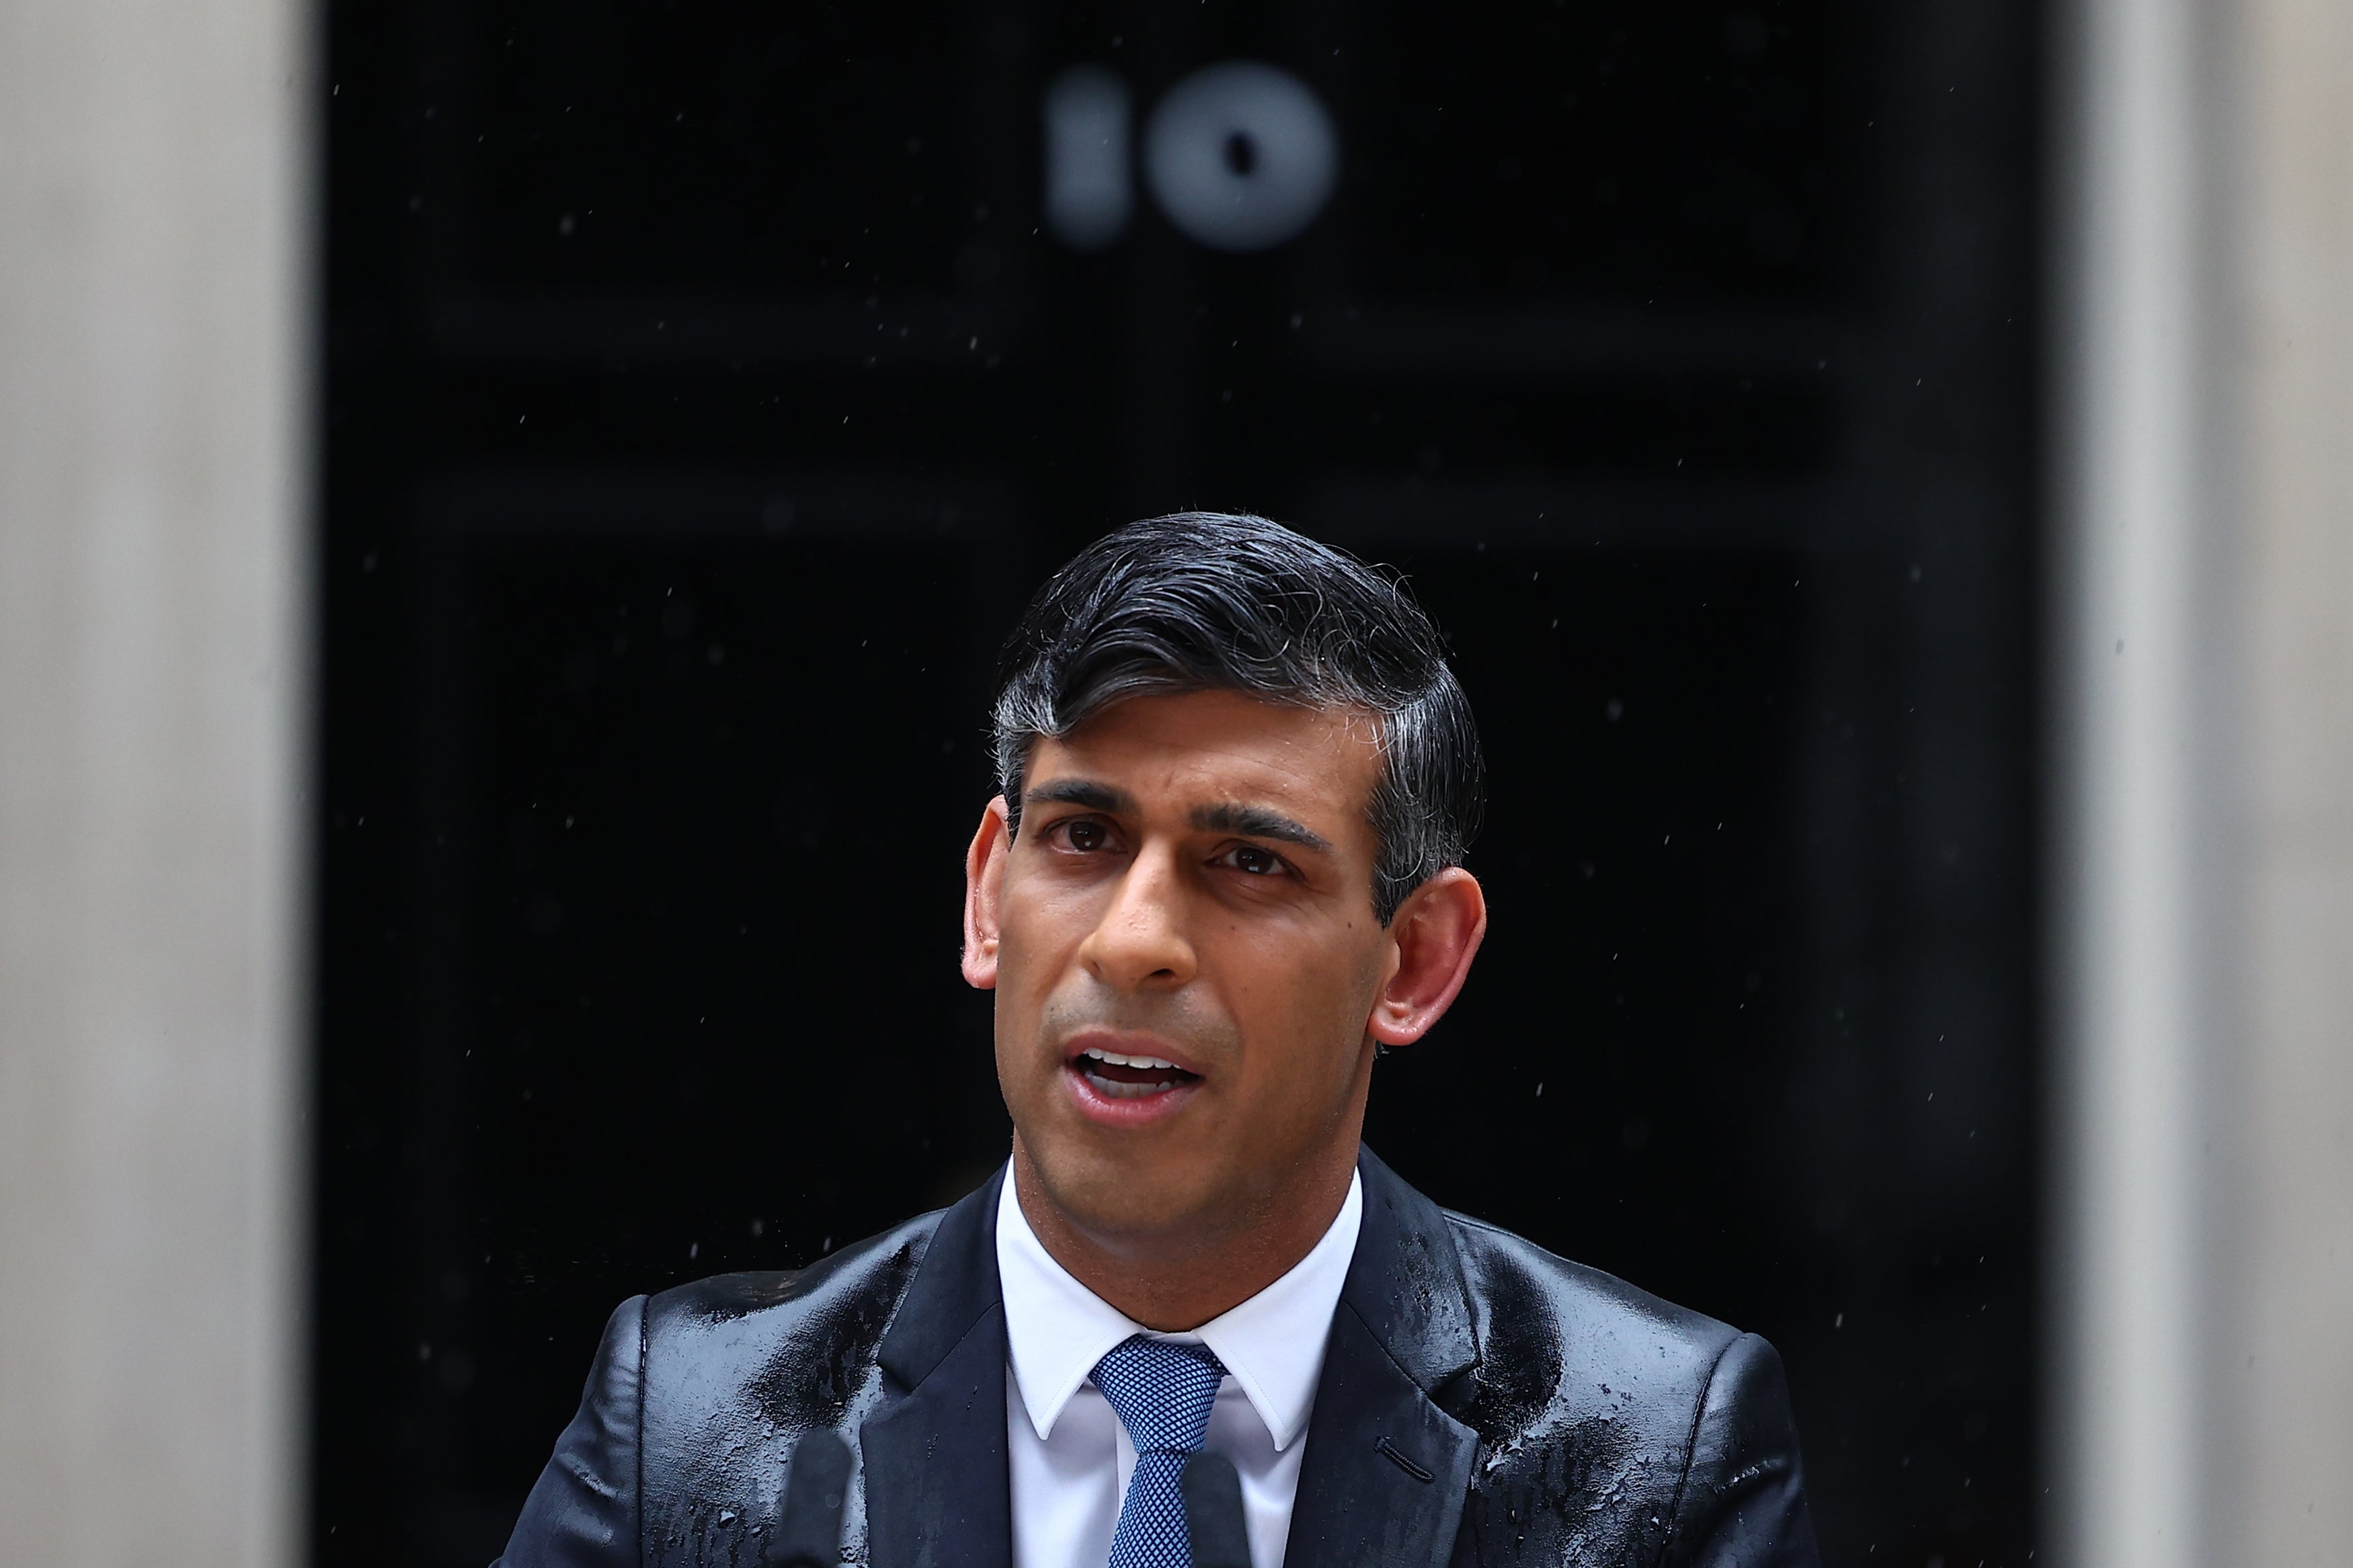 Rishi Sunak’s campaign was widely seen as a disaster from the moment he announced the election date in the pouring rain